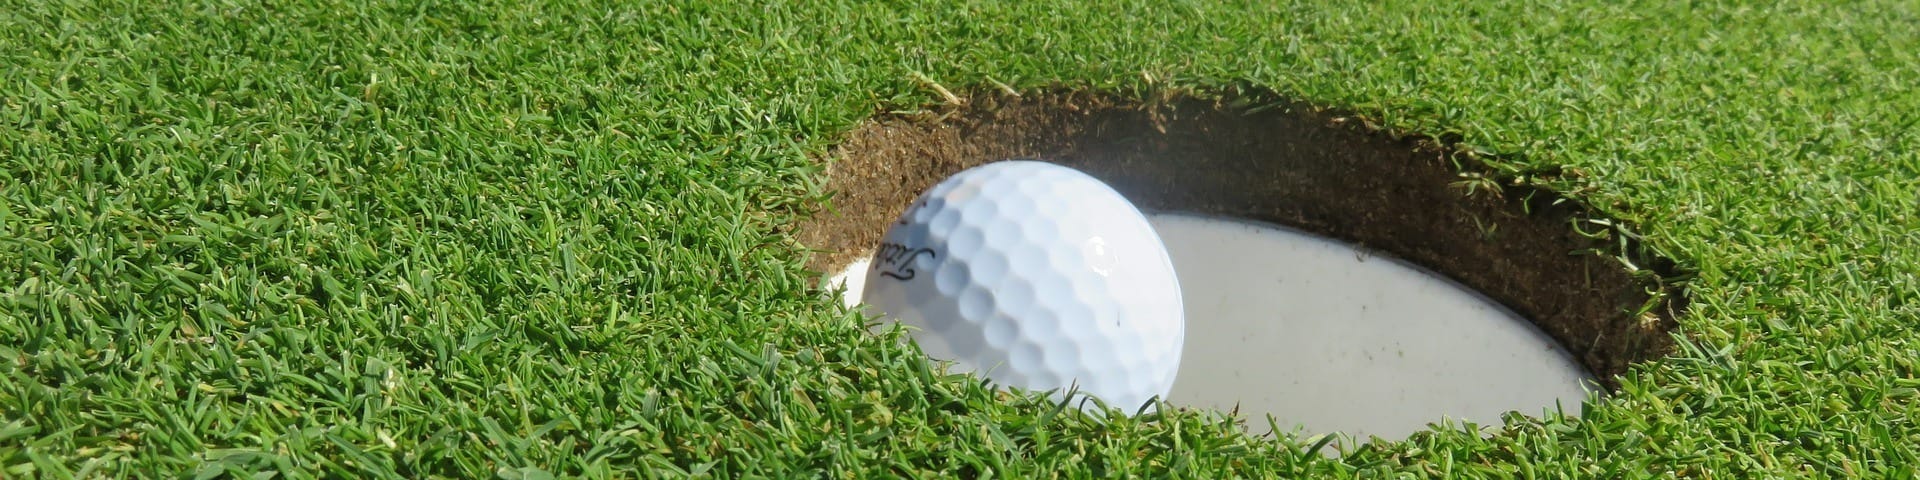 Golf Ball in the Cup